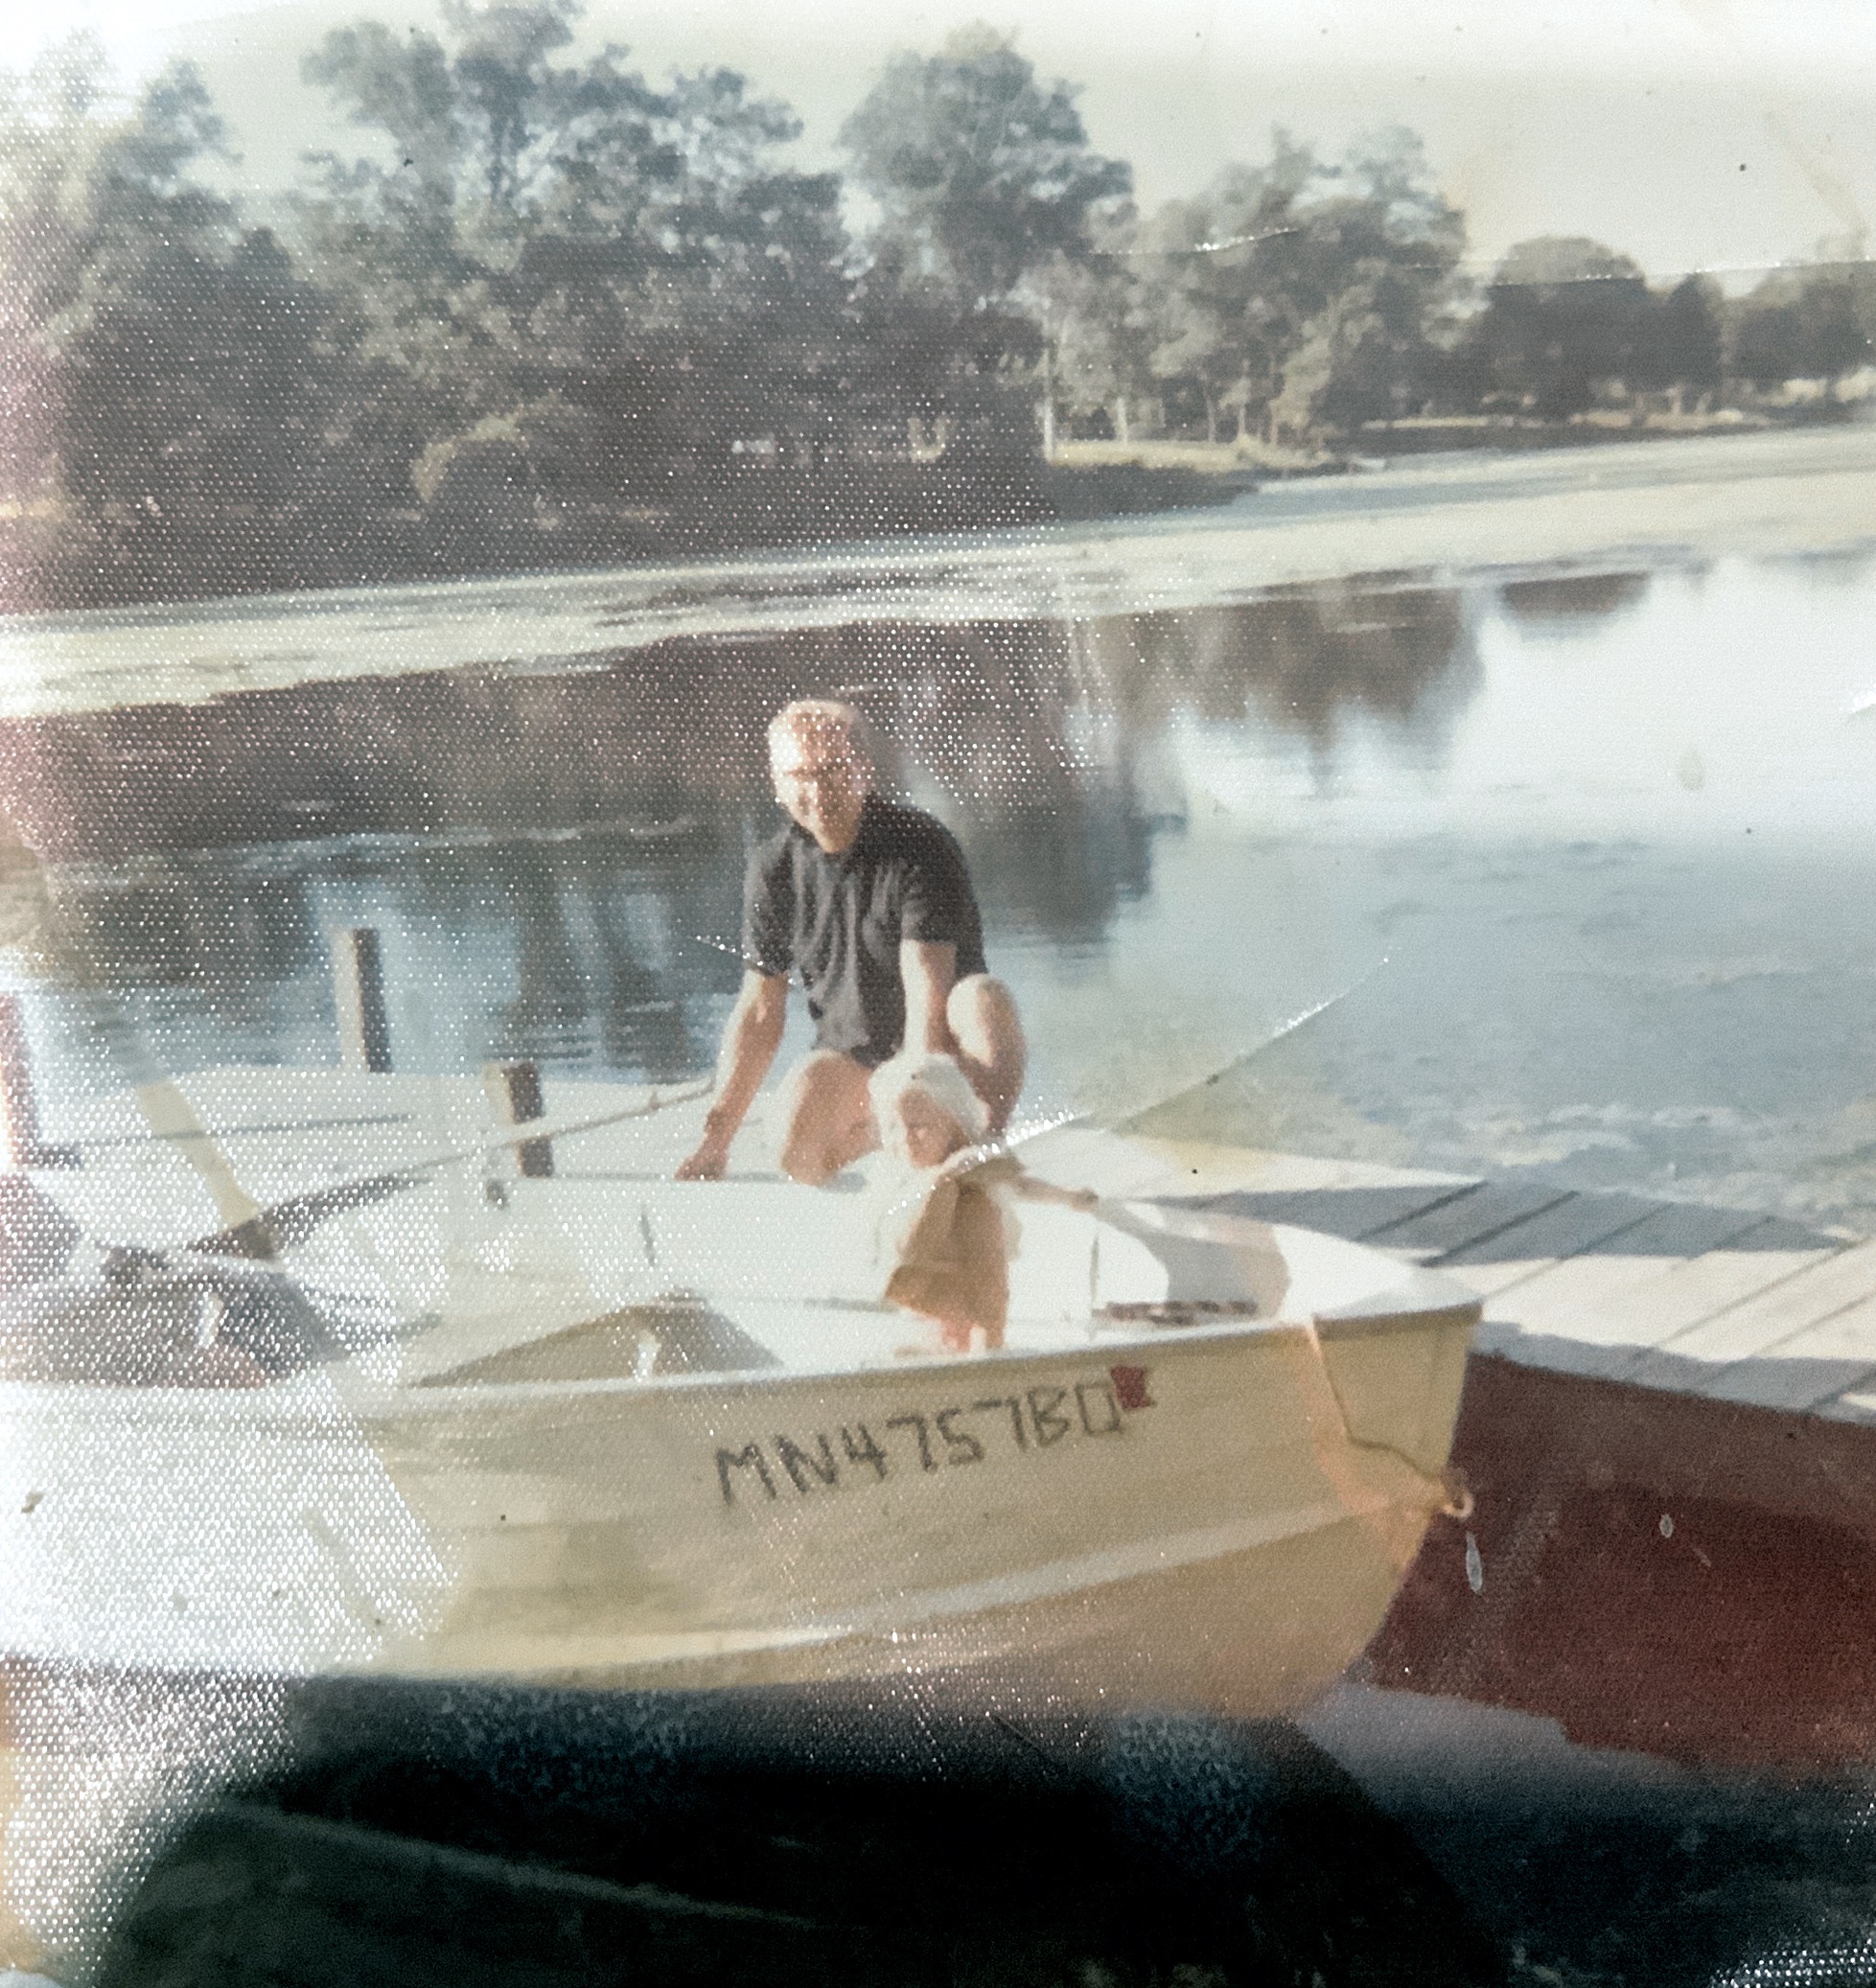 Dad and Aimee.1971 on 
Aimee’s first fishing trip.
Big lake Mn (I think)